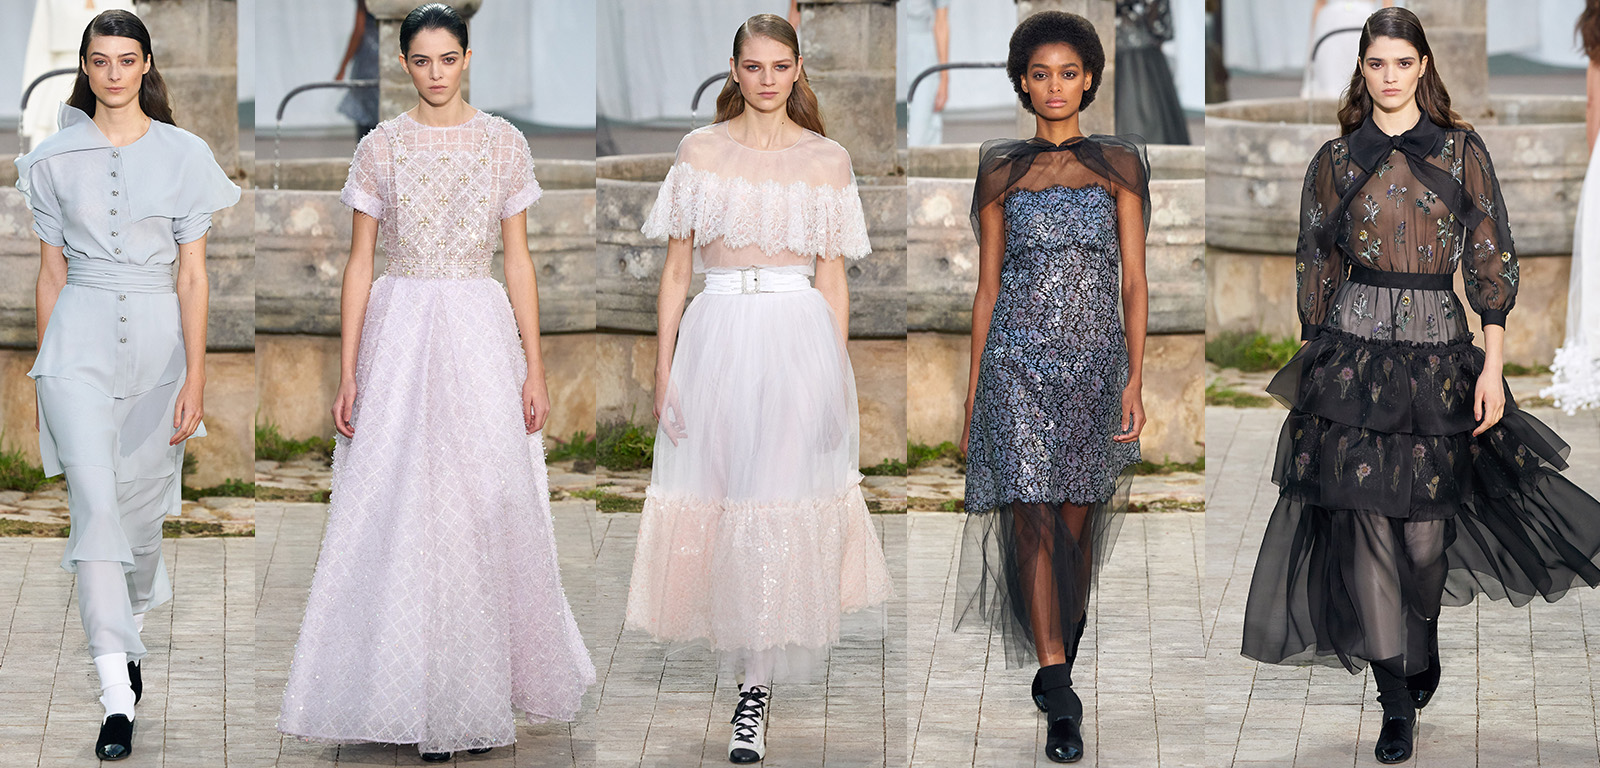 A Blush of Rose - Haute Couture Spring & Summer 2020 part 2